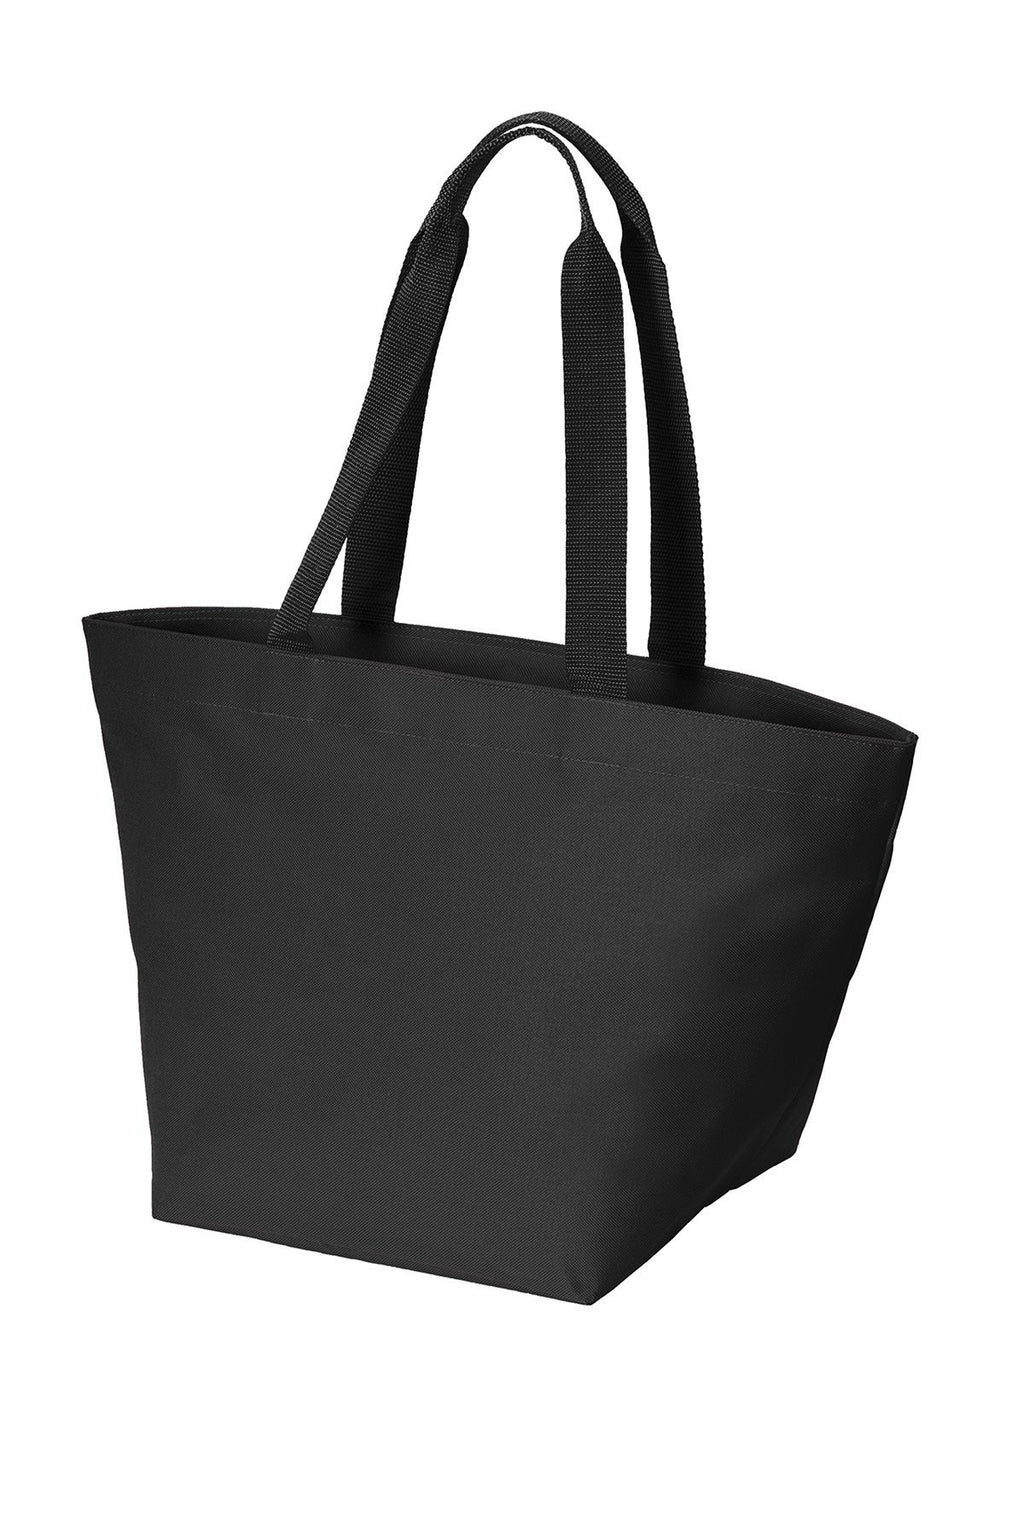 BAGANDTOTE Canvas Tote Bag BLACK Carry All Zip Polyester Canvas Tote Bag